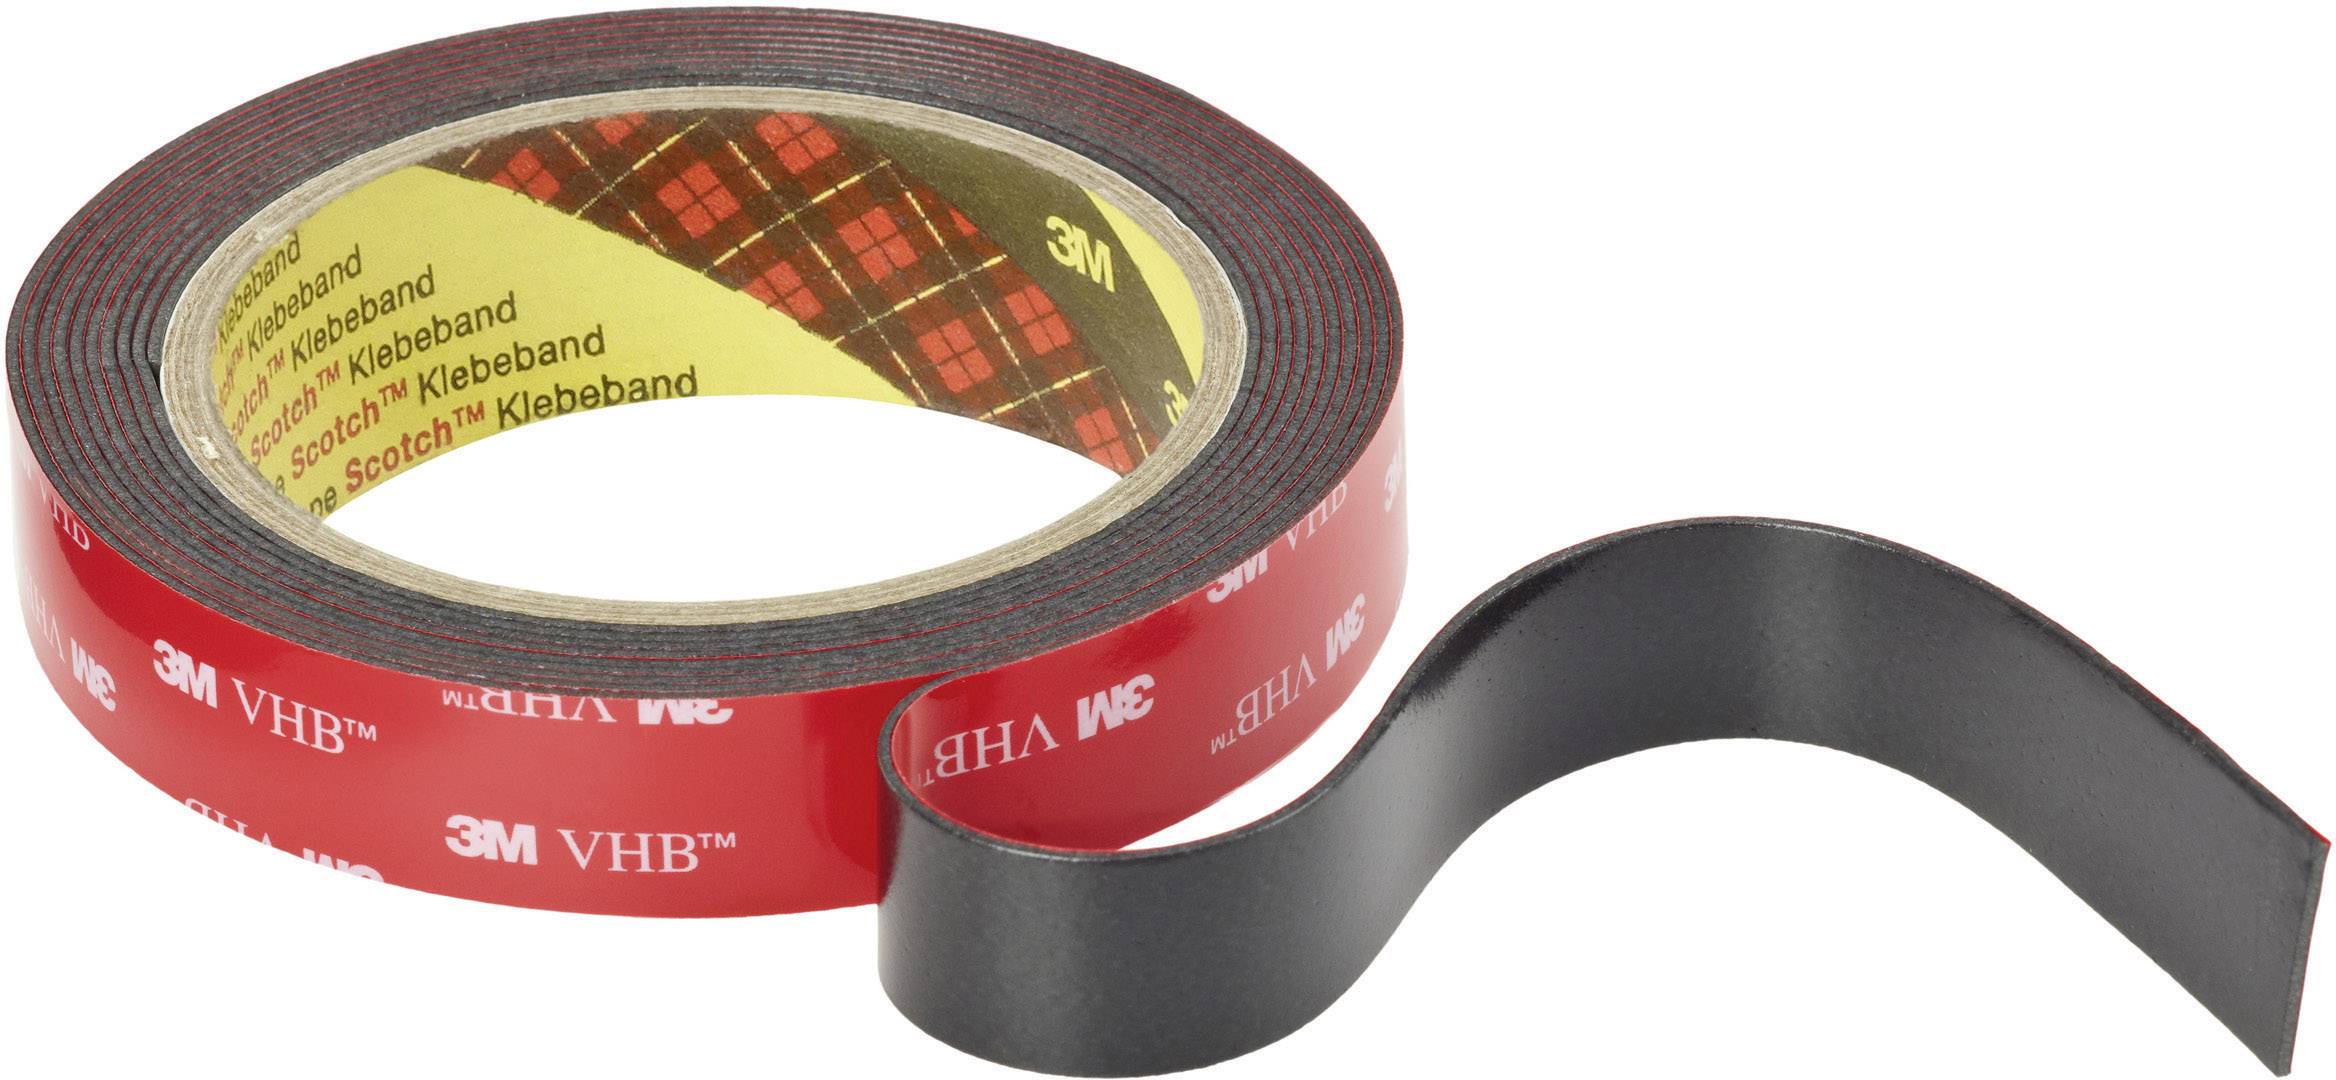 3m double sided tape automotive images